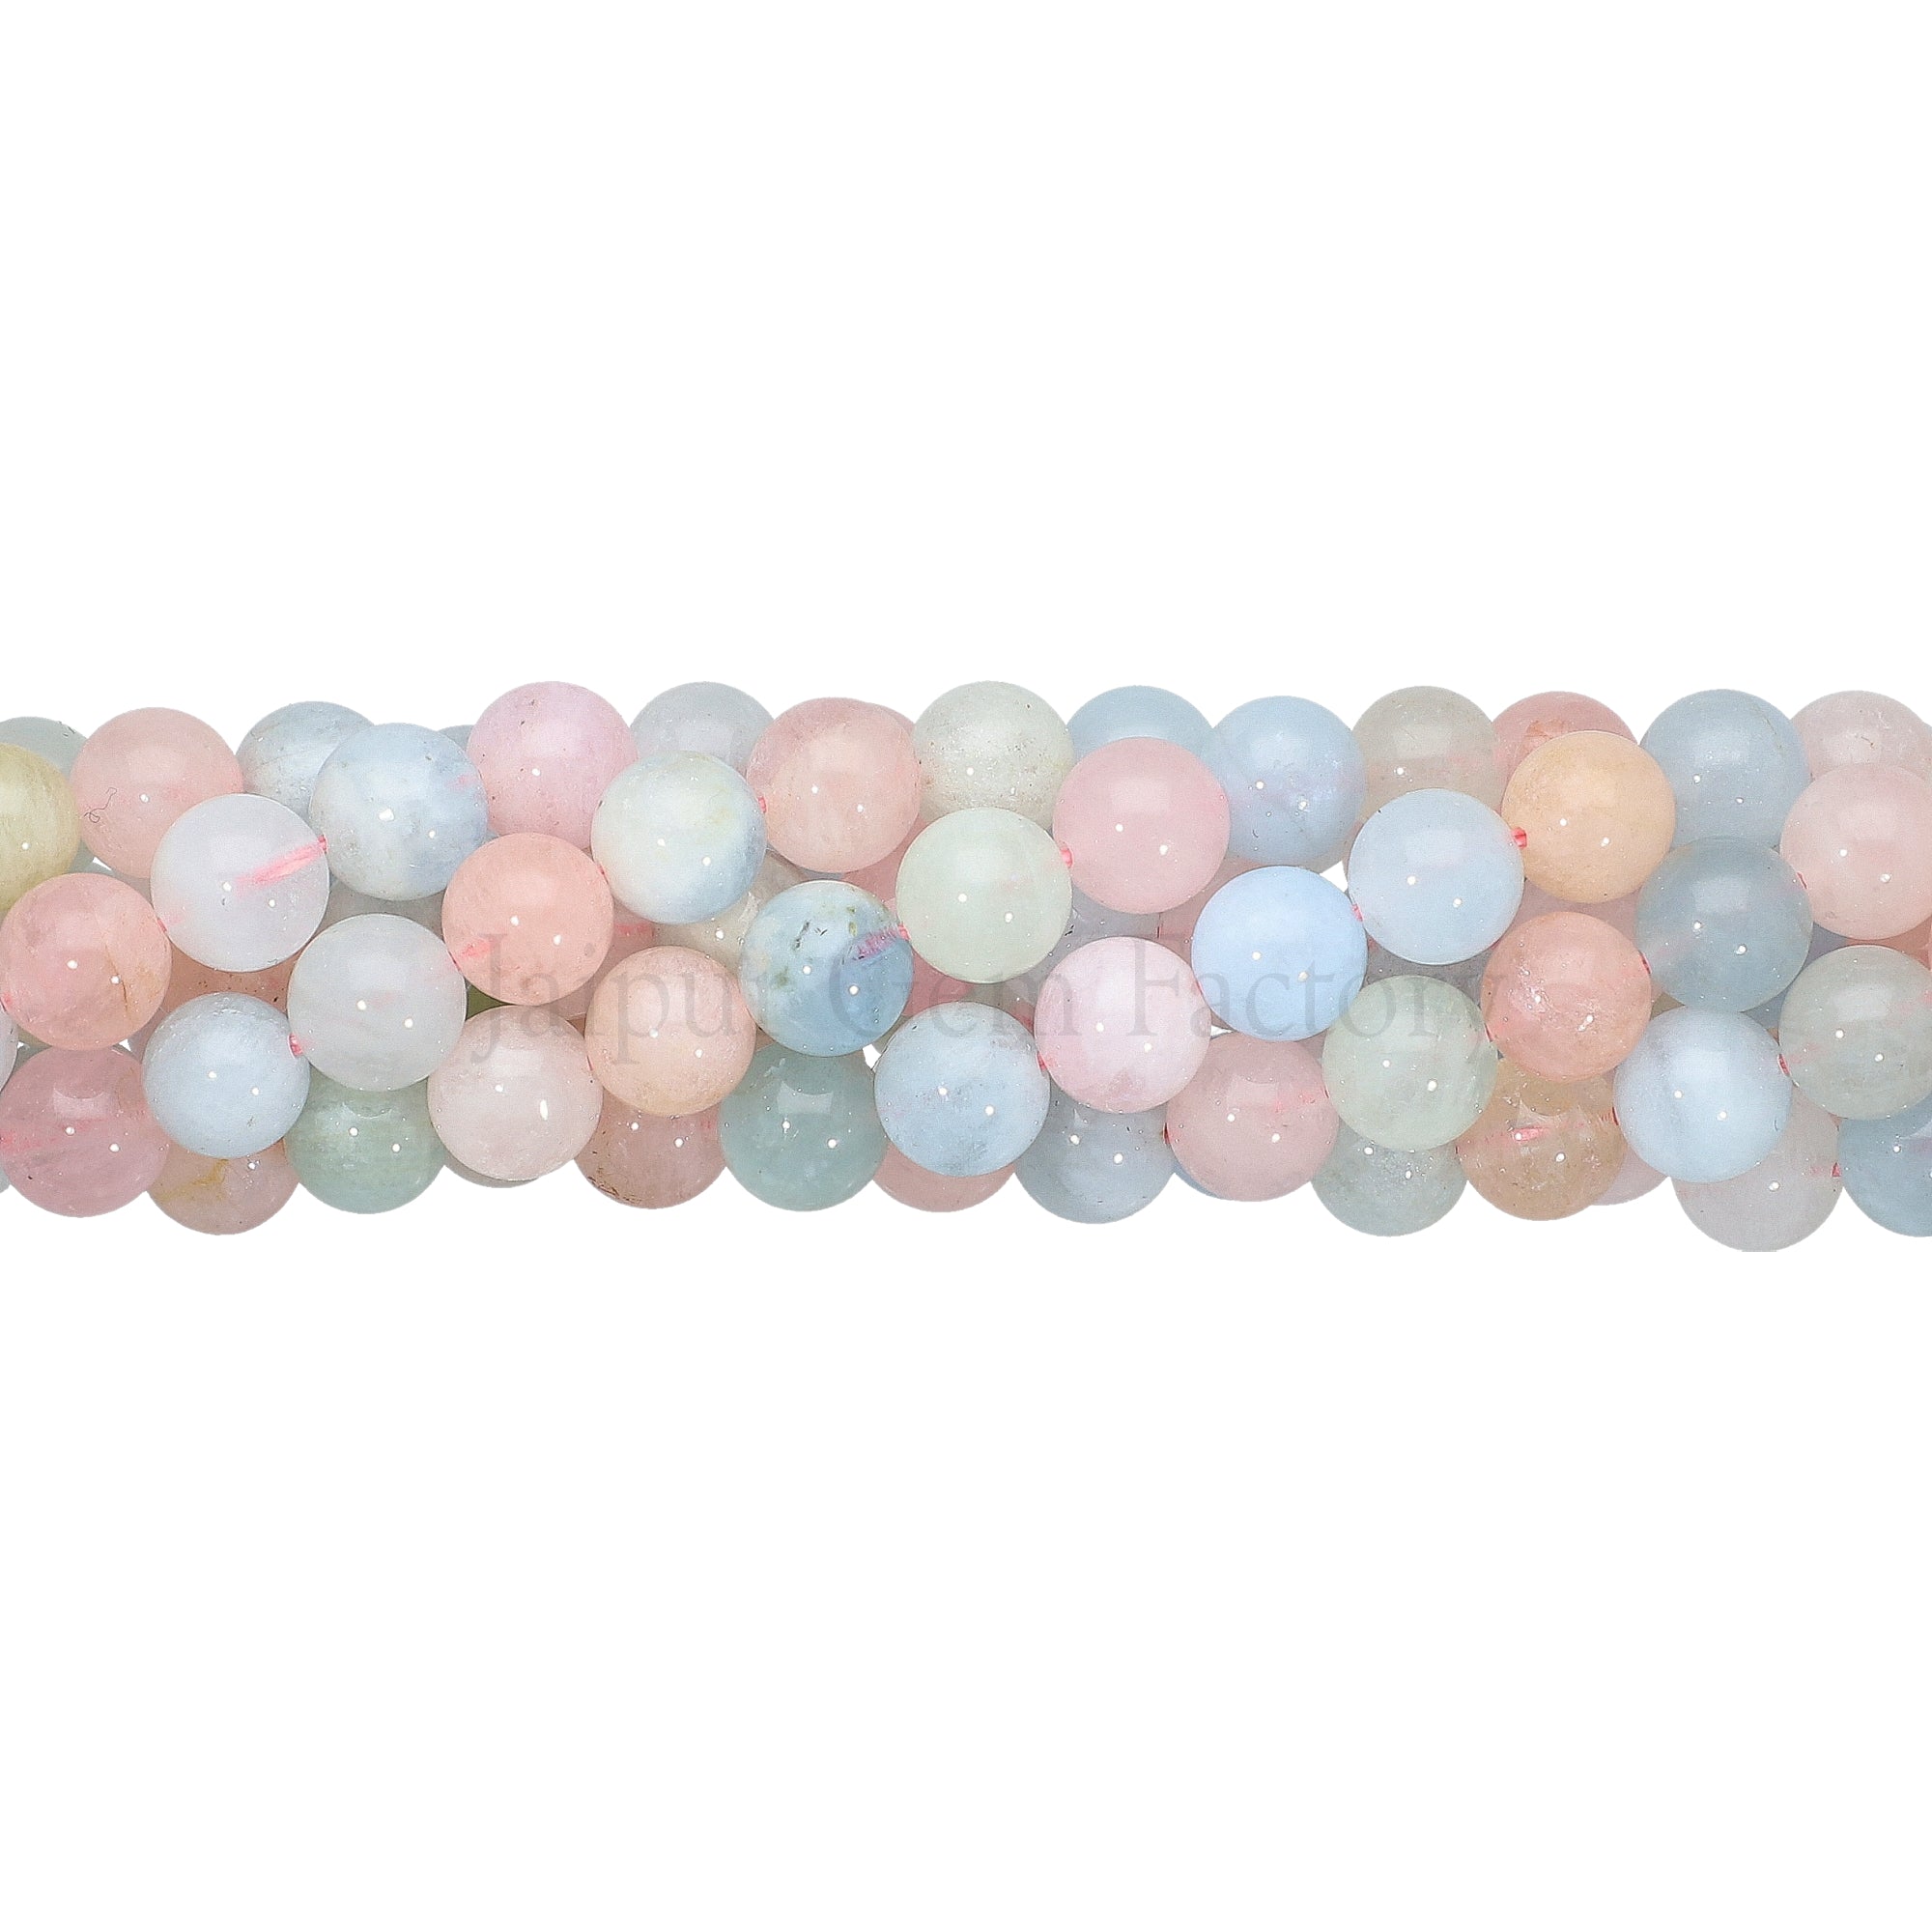 8 MM Morganite Smooth Round Beads 14 Inches Strand